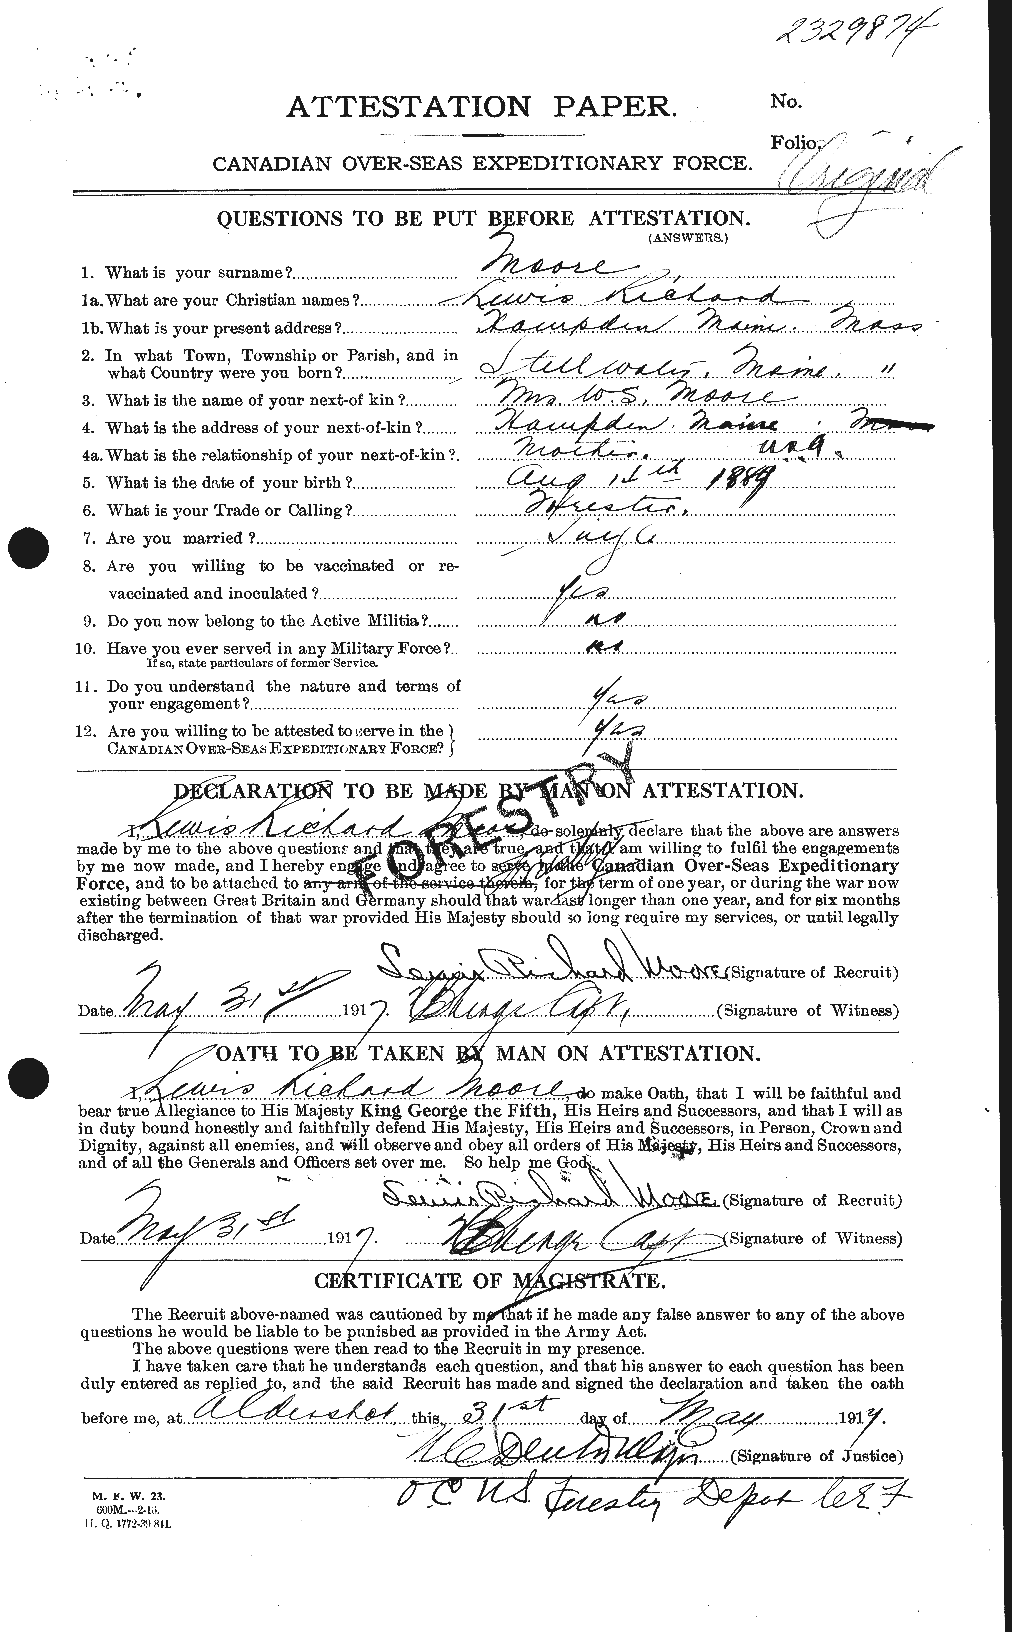 Personnel Records of the First World War - CEF 503414a